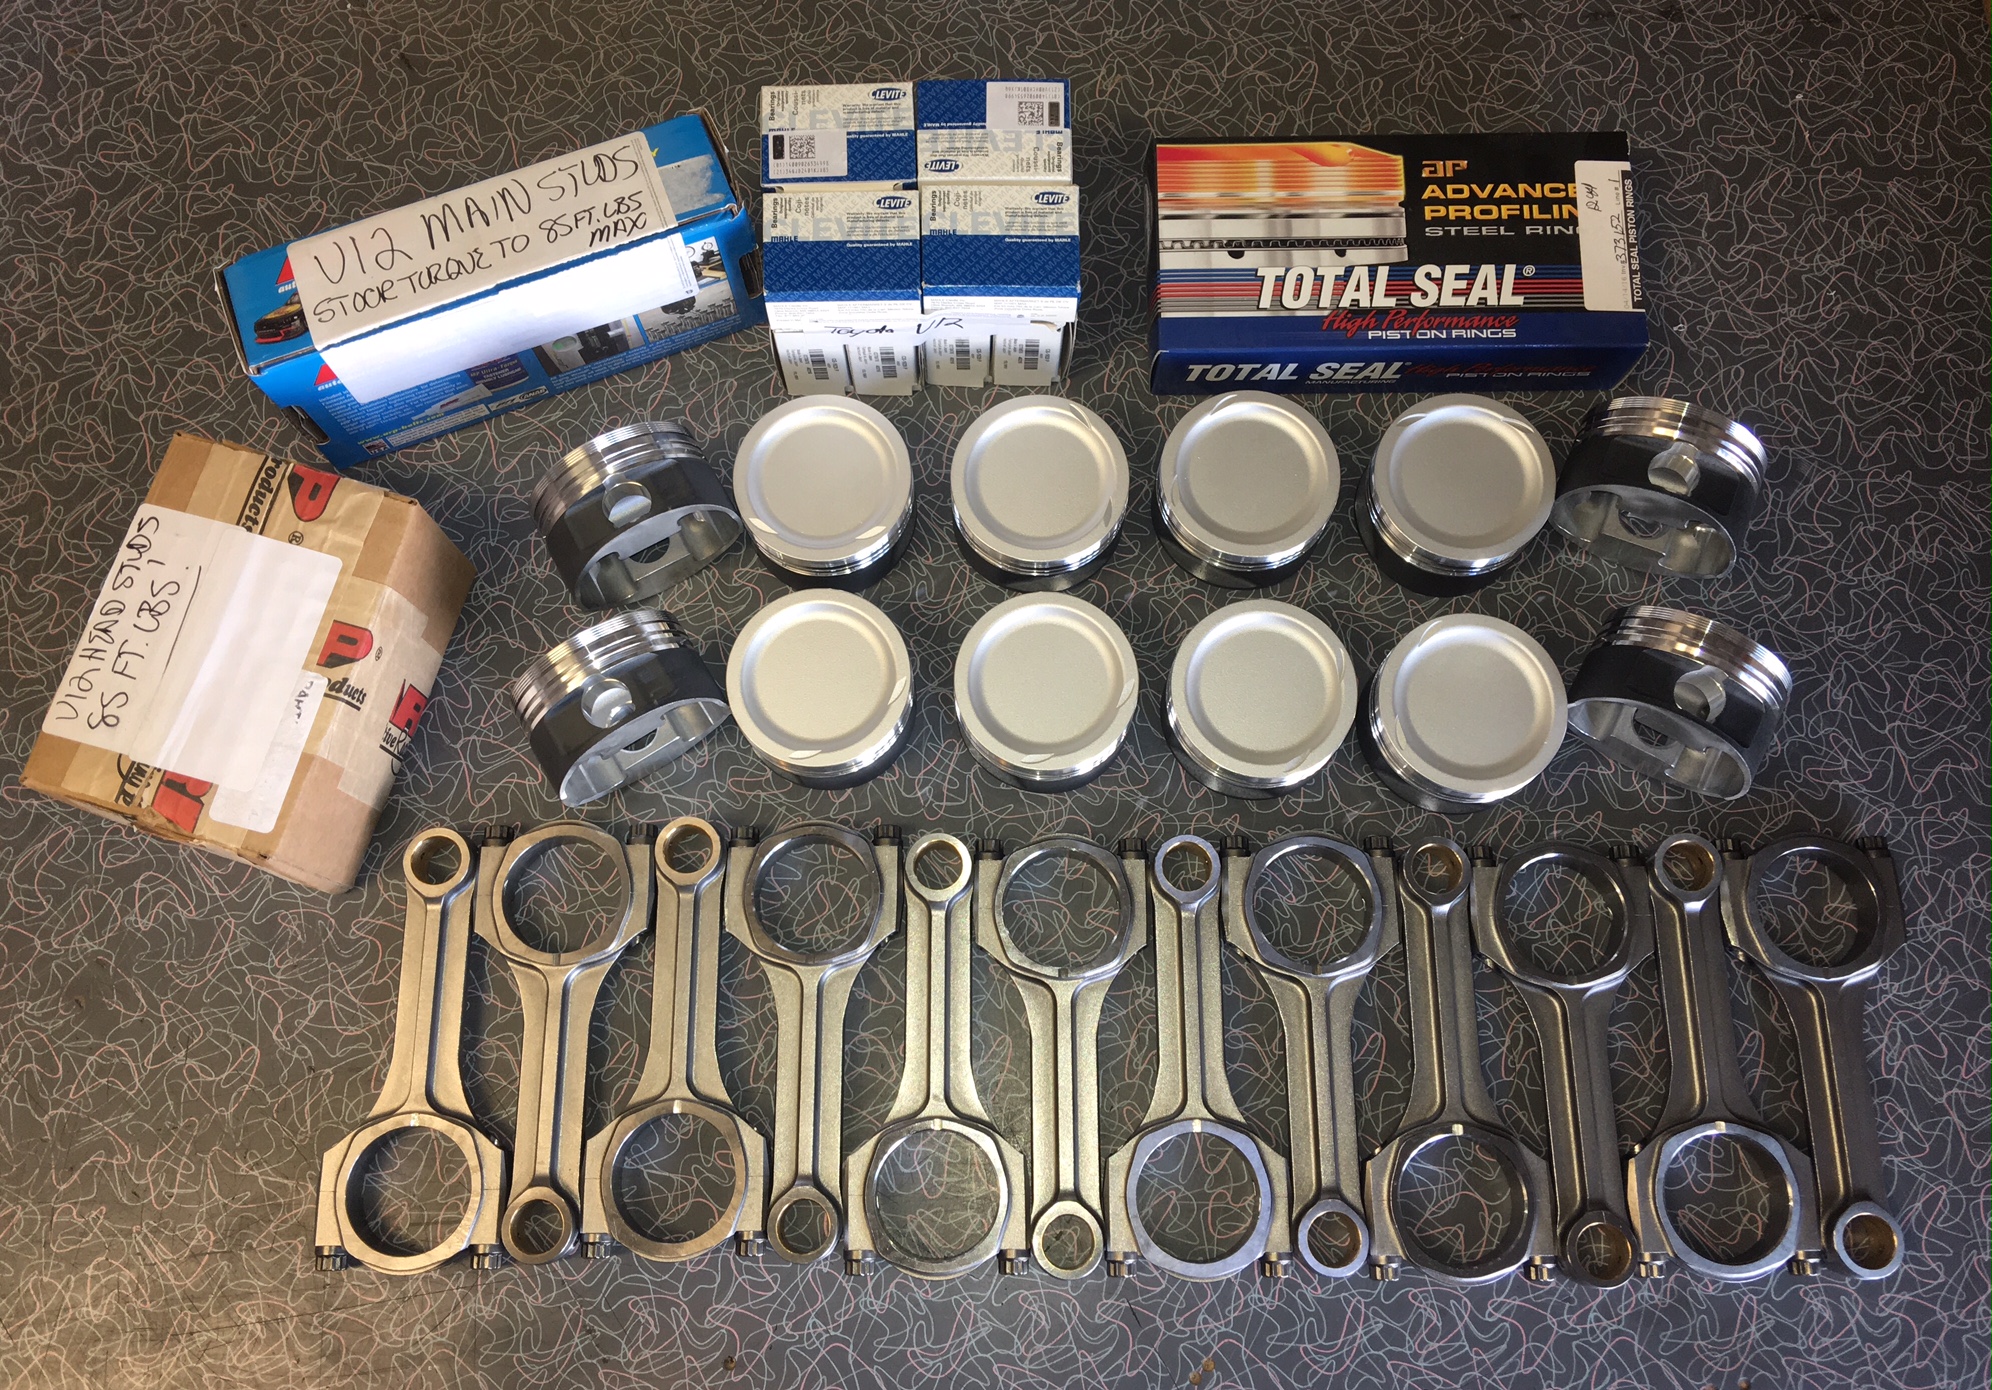 Performance Engine Components. Pistons, Rods, Etc.